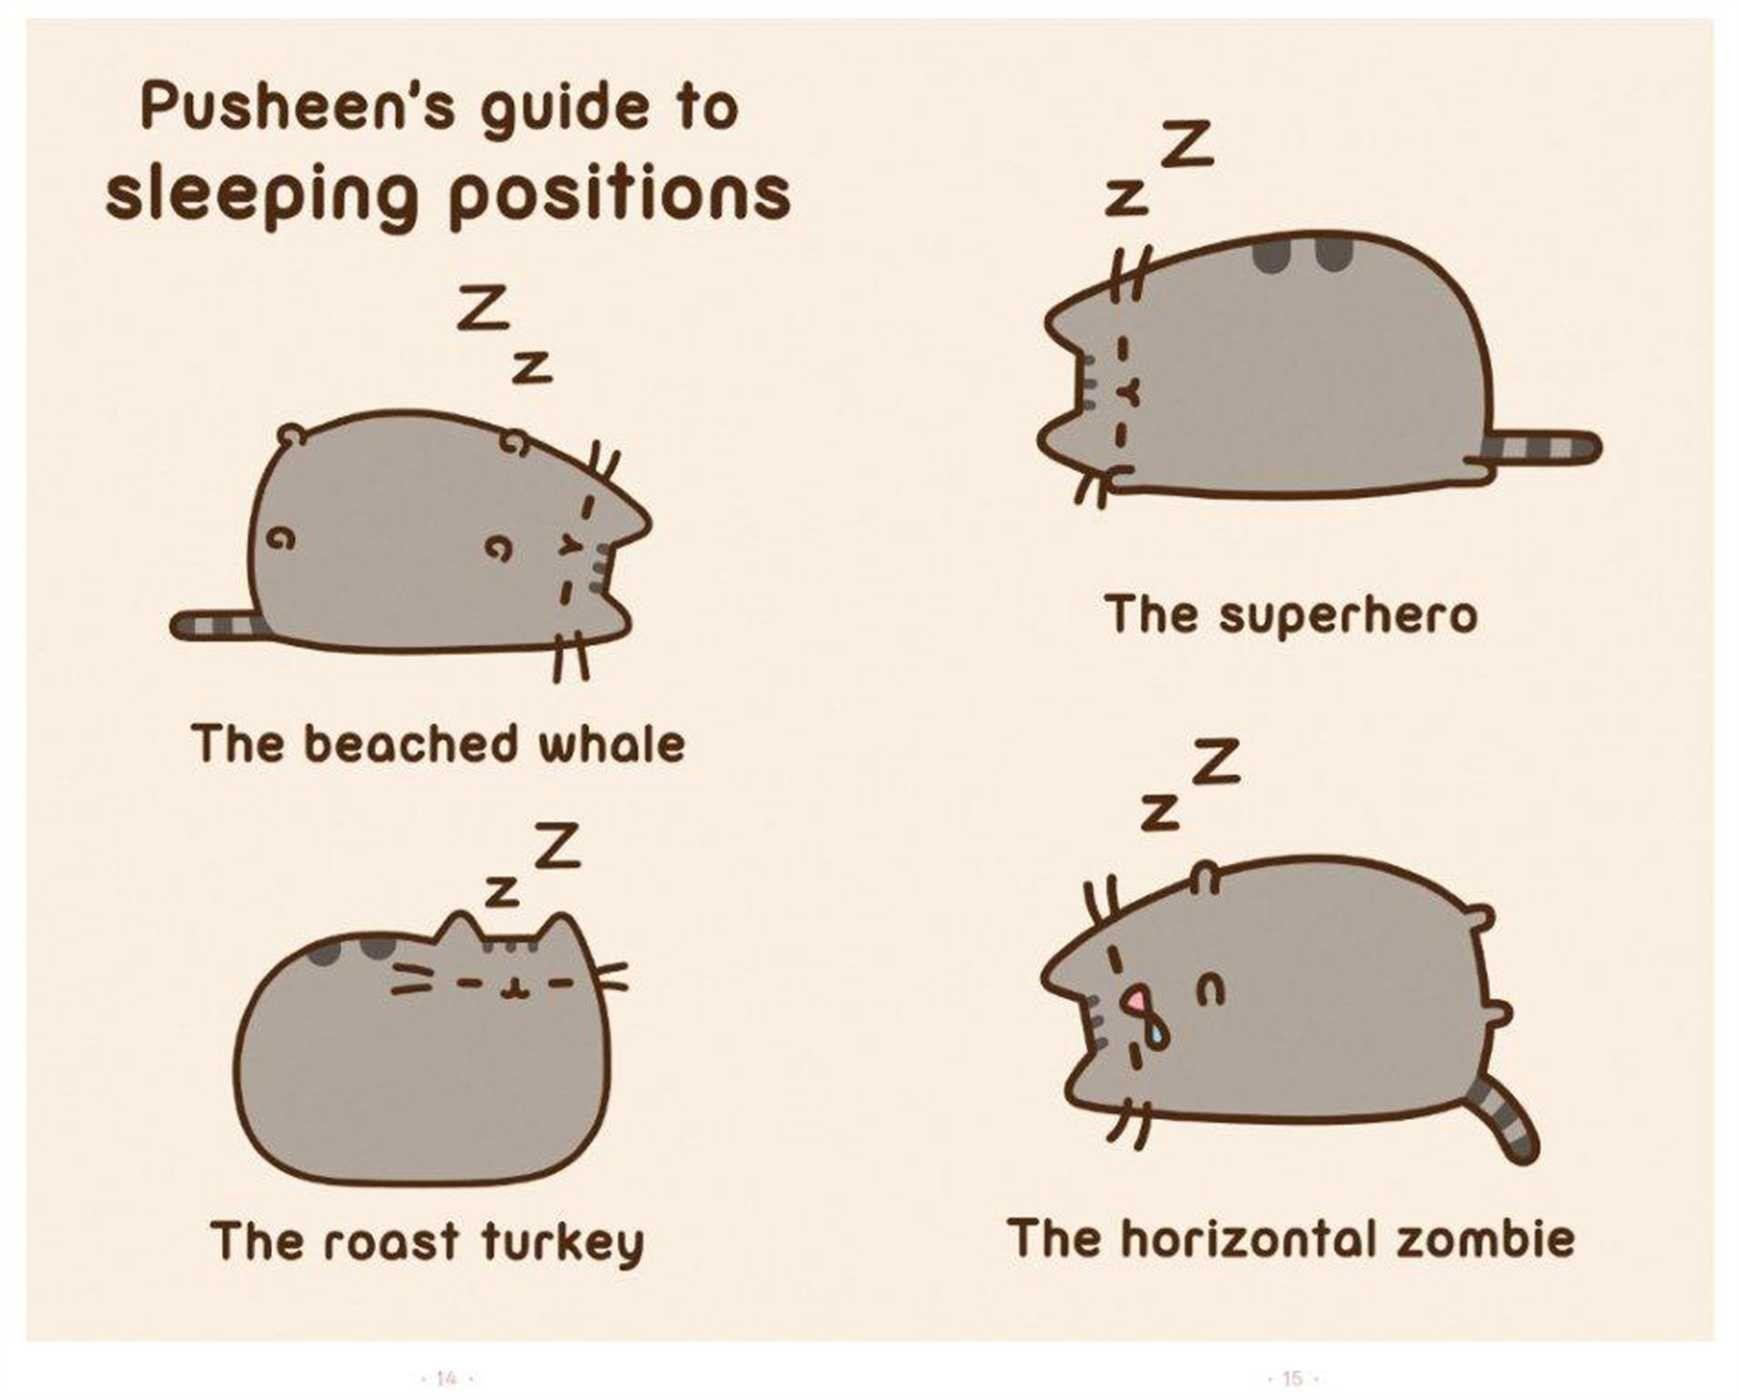 best image about Pusheen the cat!!. Cats, Pizza